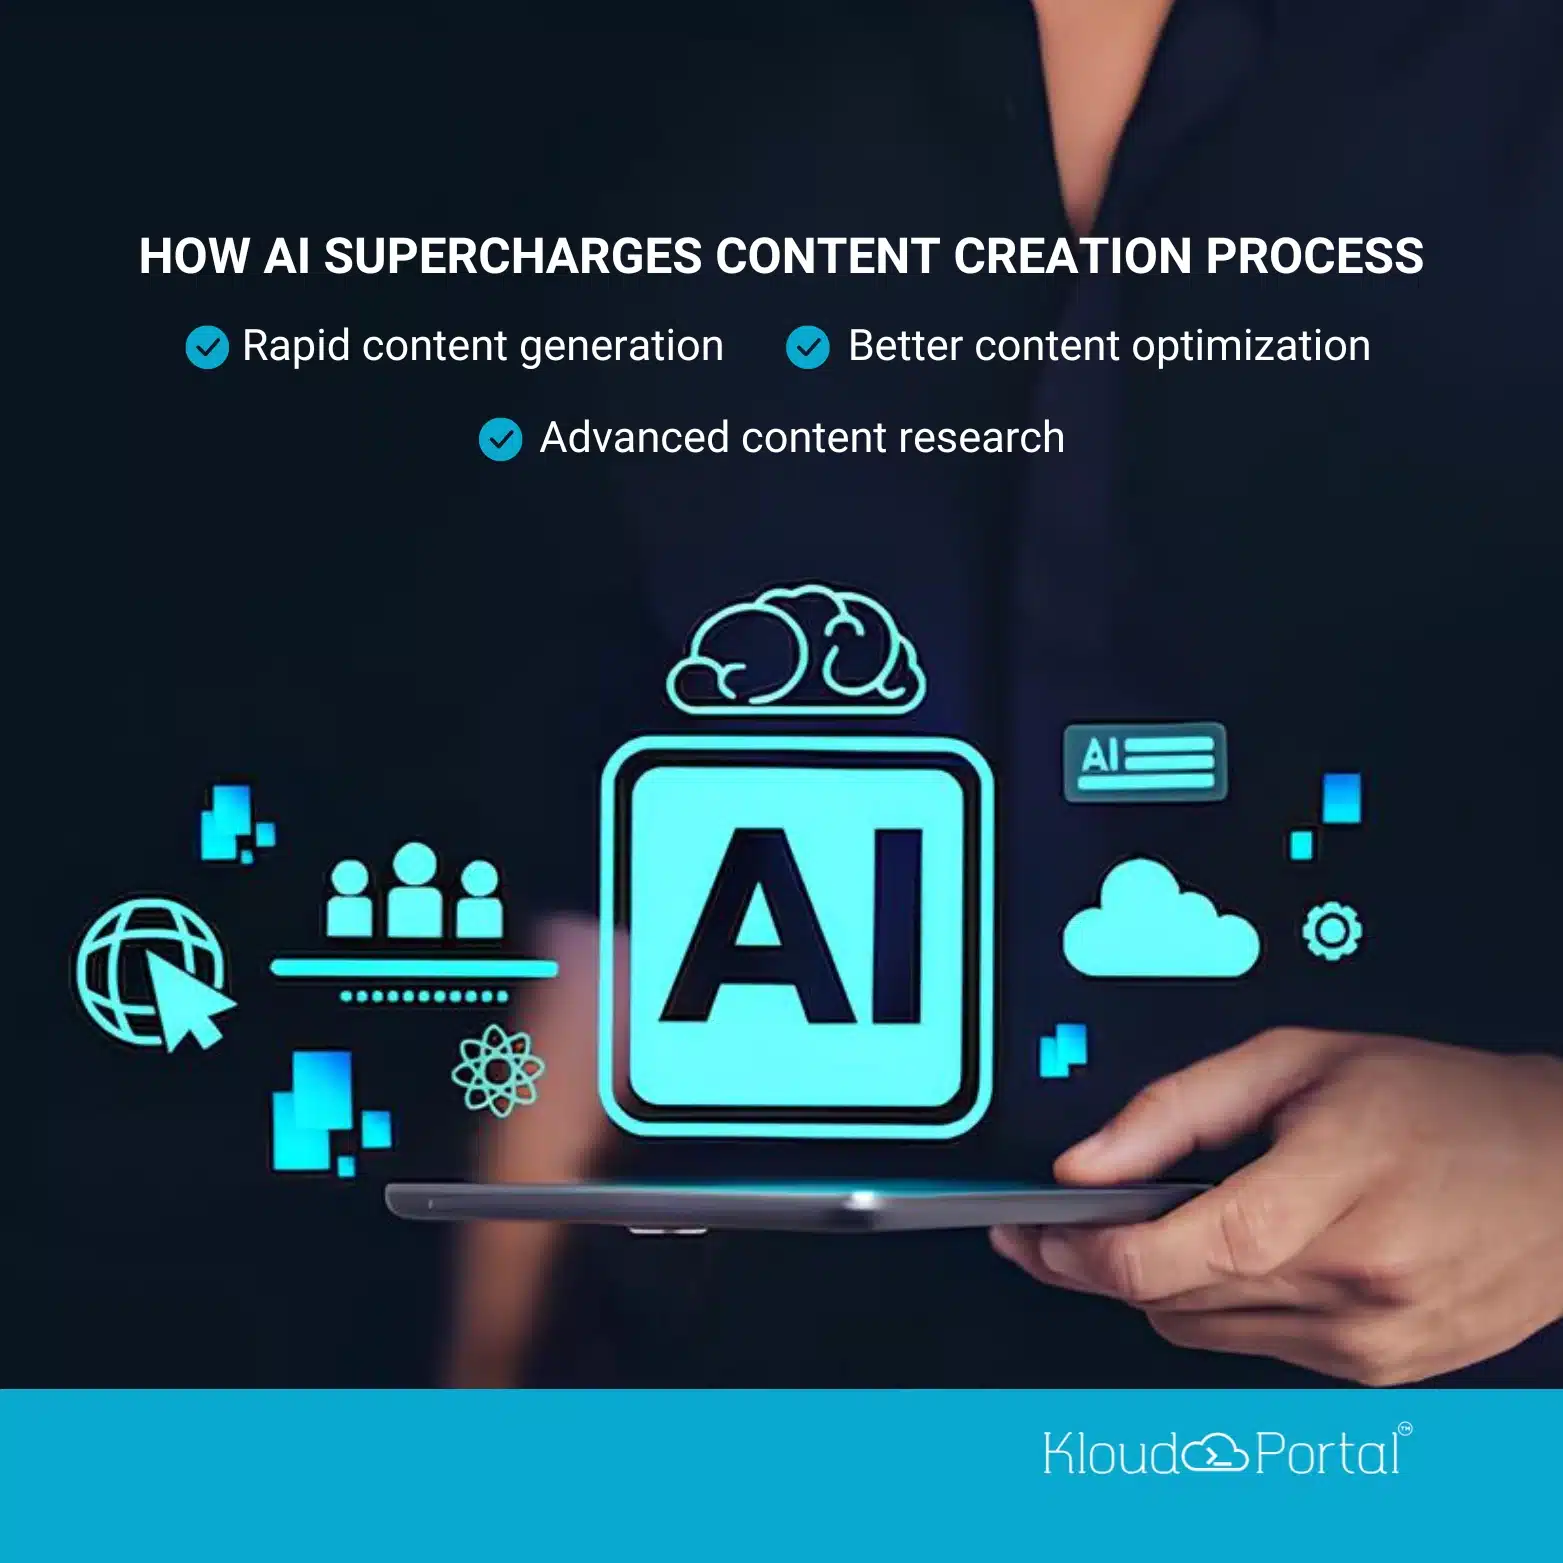 How AI Supercharges Content Creation Process